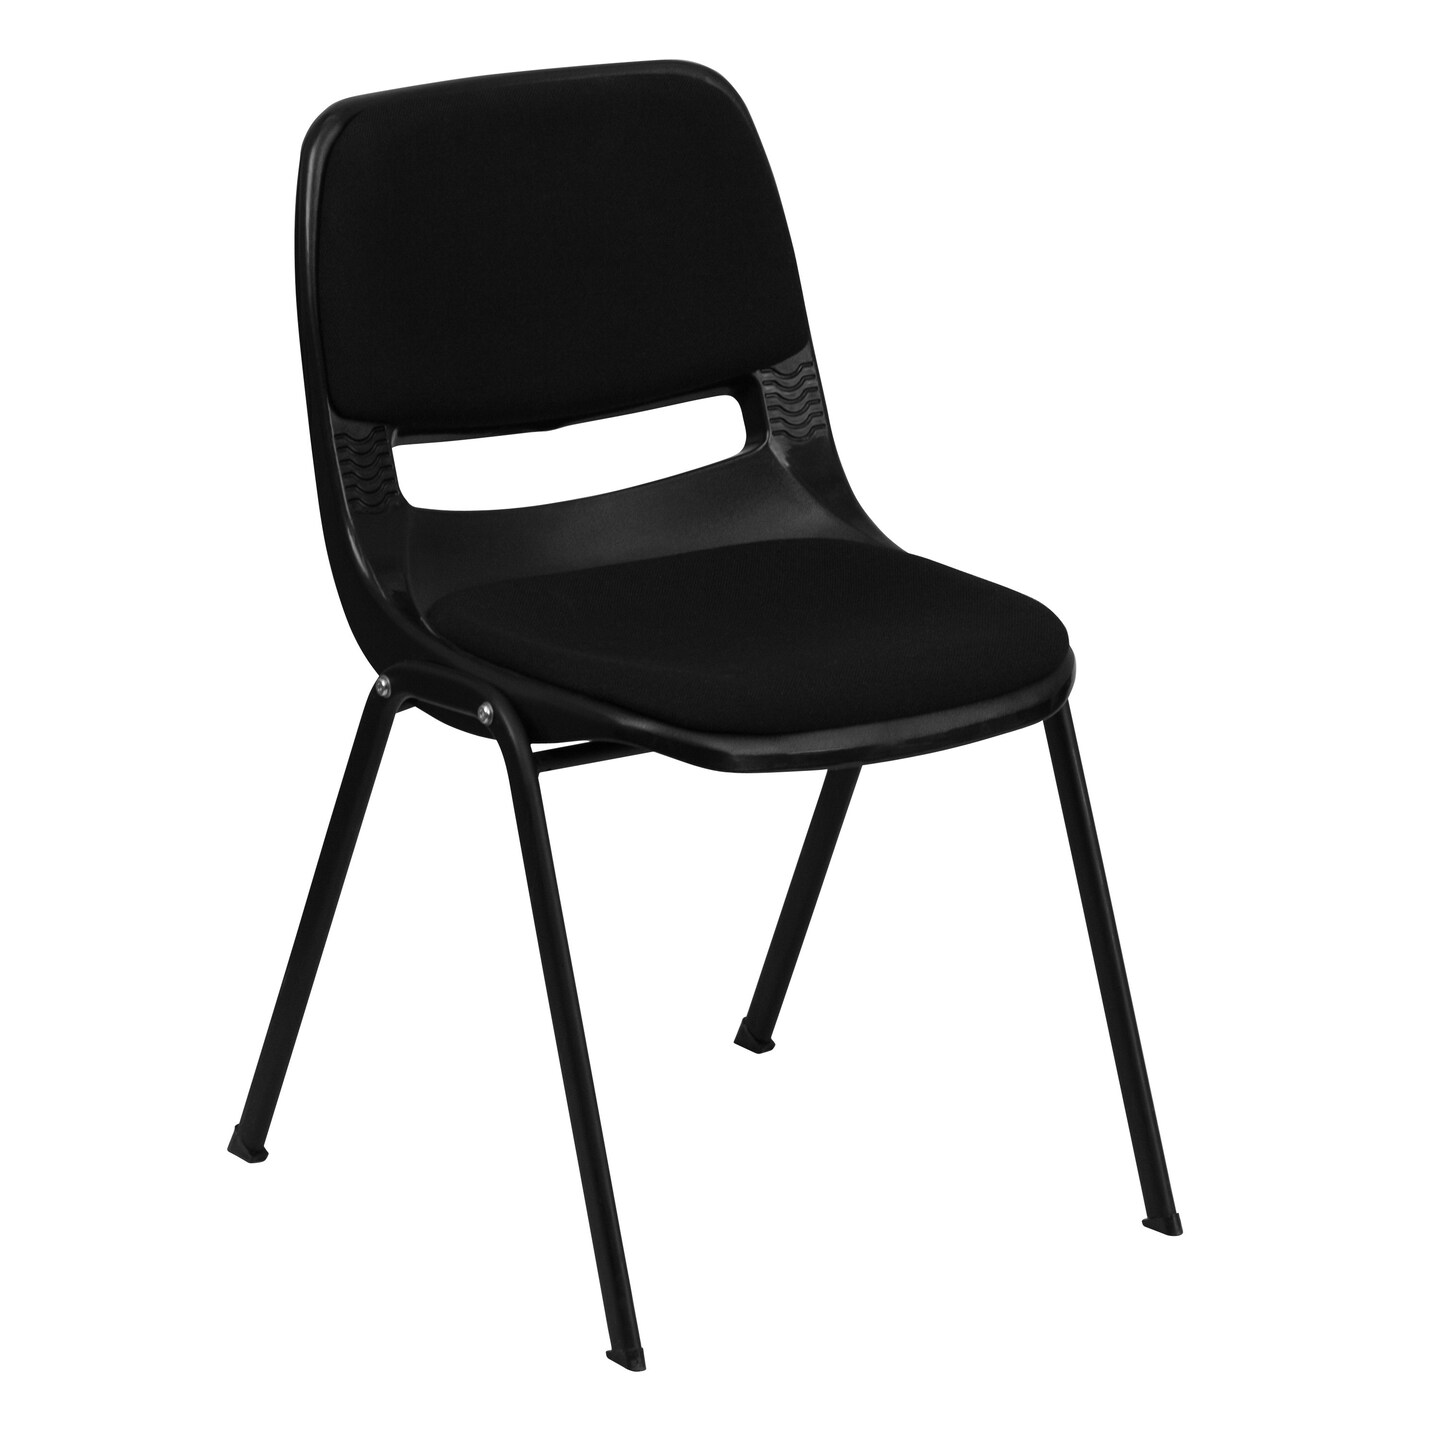 Emma and Oliver 880 lb. Capacity Padded Ergonomic Shell Stack Chair with Metal Frame